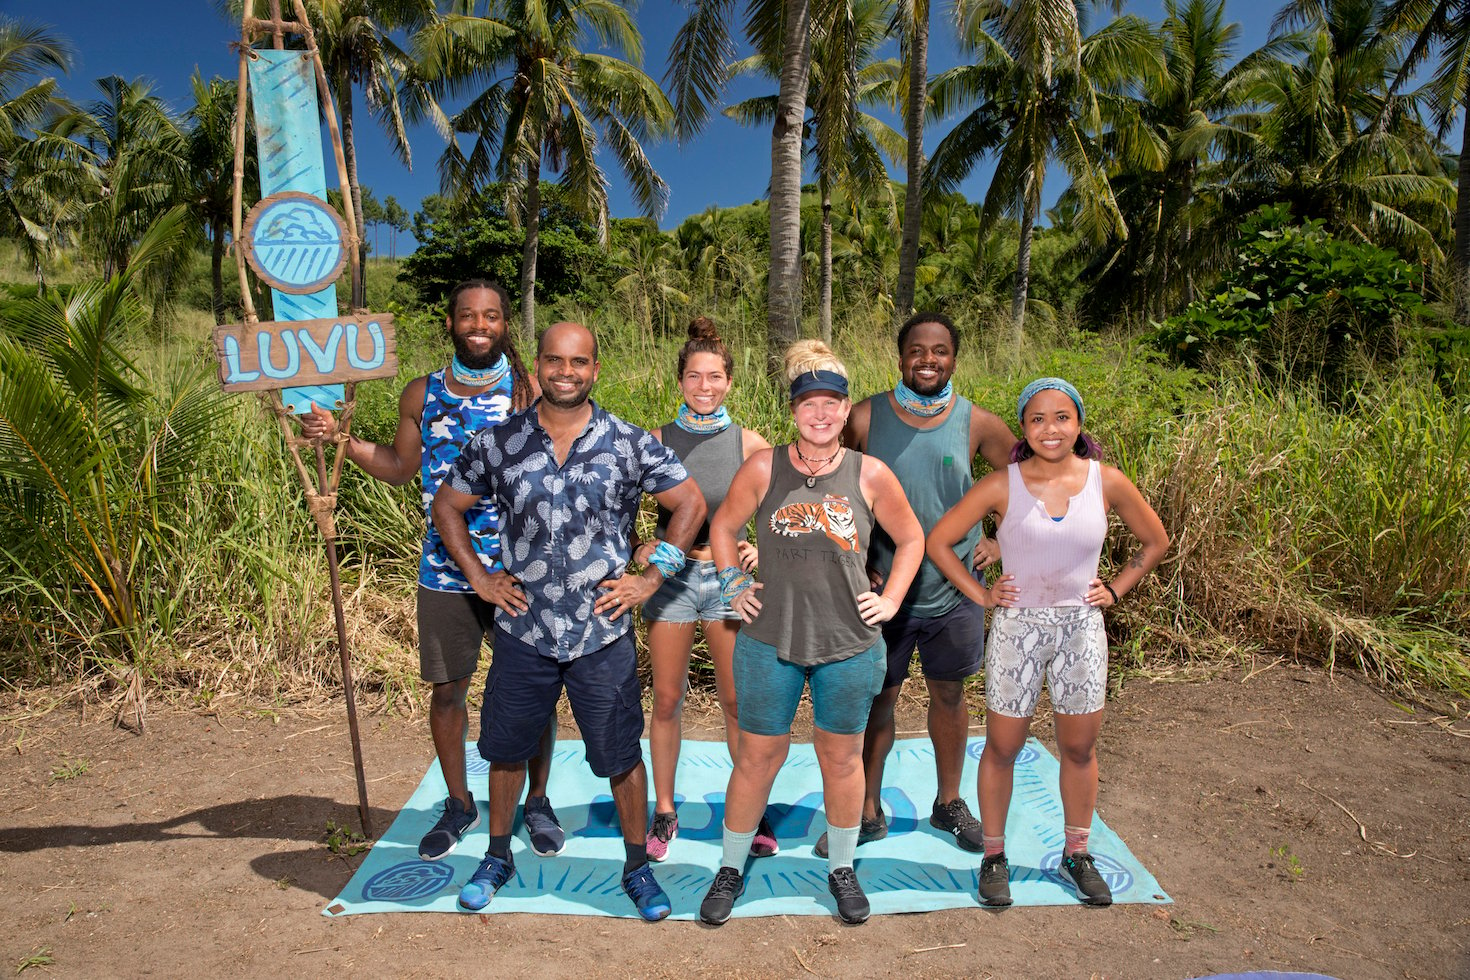 The Luvu Tribe standing together with their tribe sign from 'Survivor' Season 41. 'Survivor' Season 41 spoilers note Luvu won the first immunity challenge